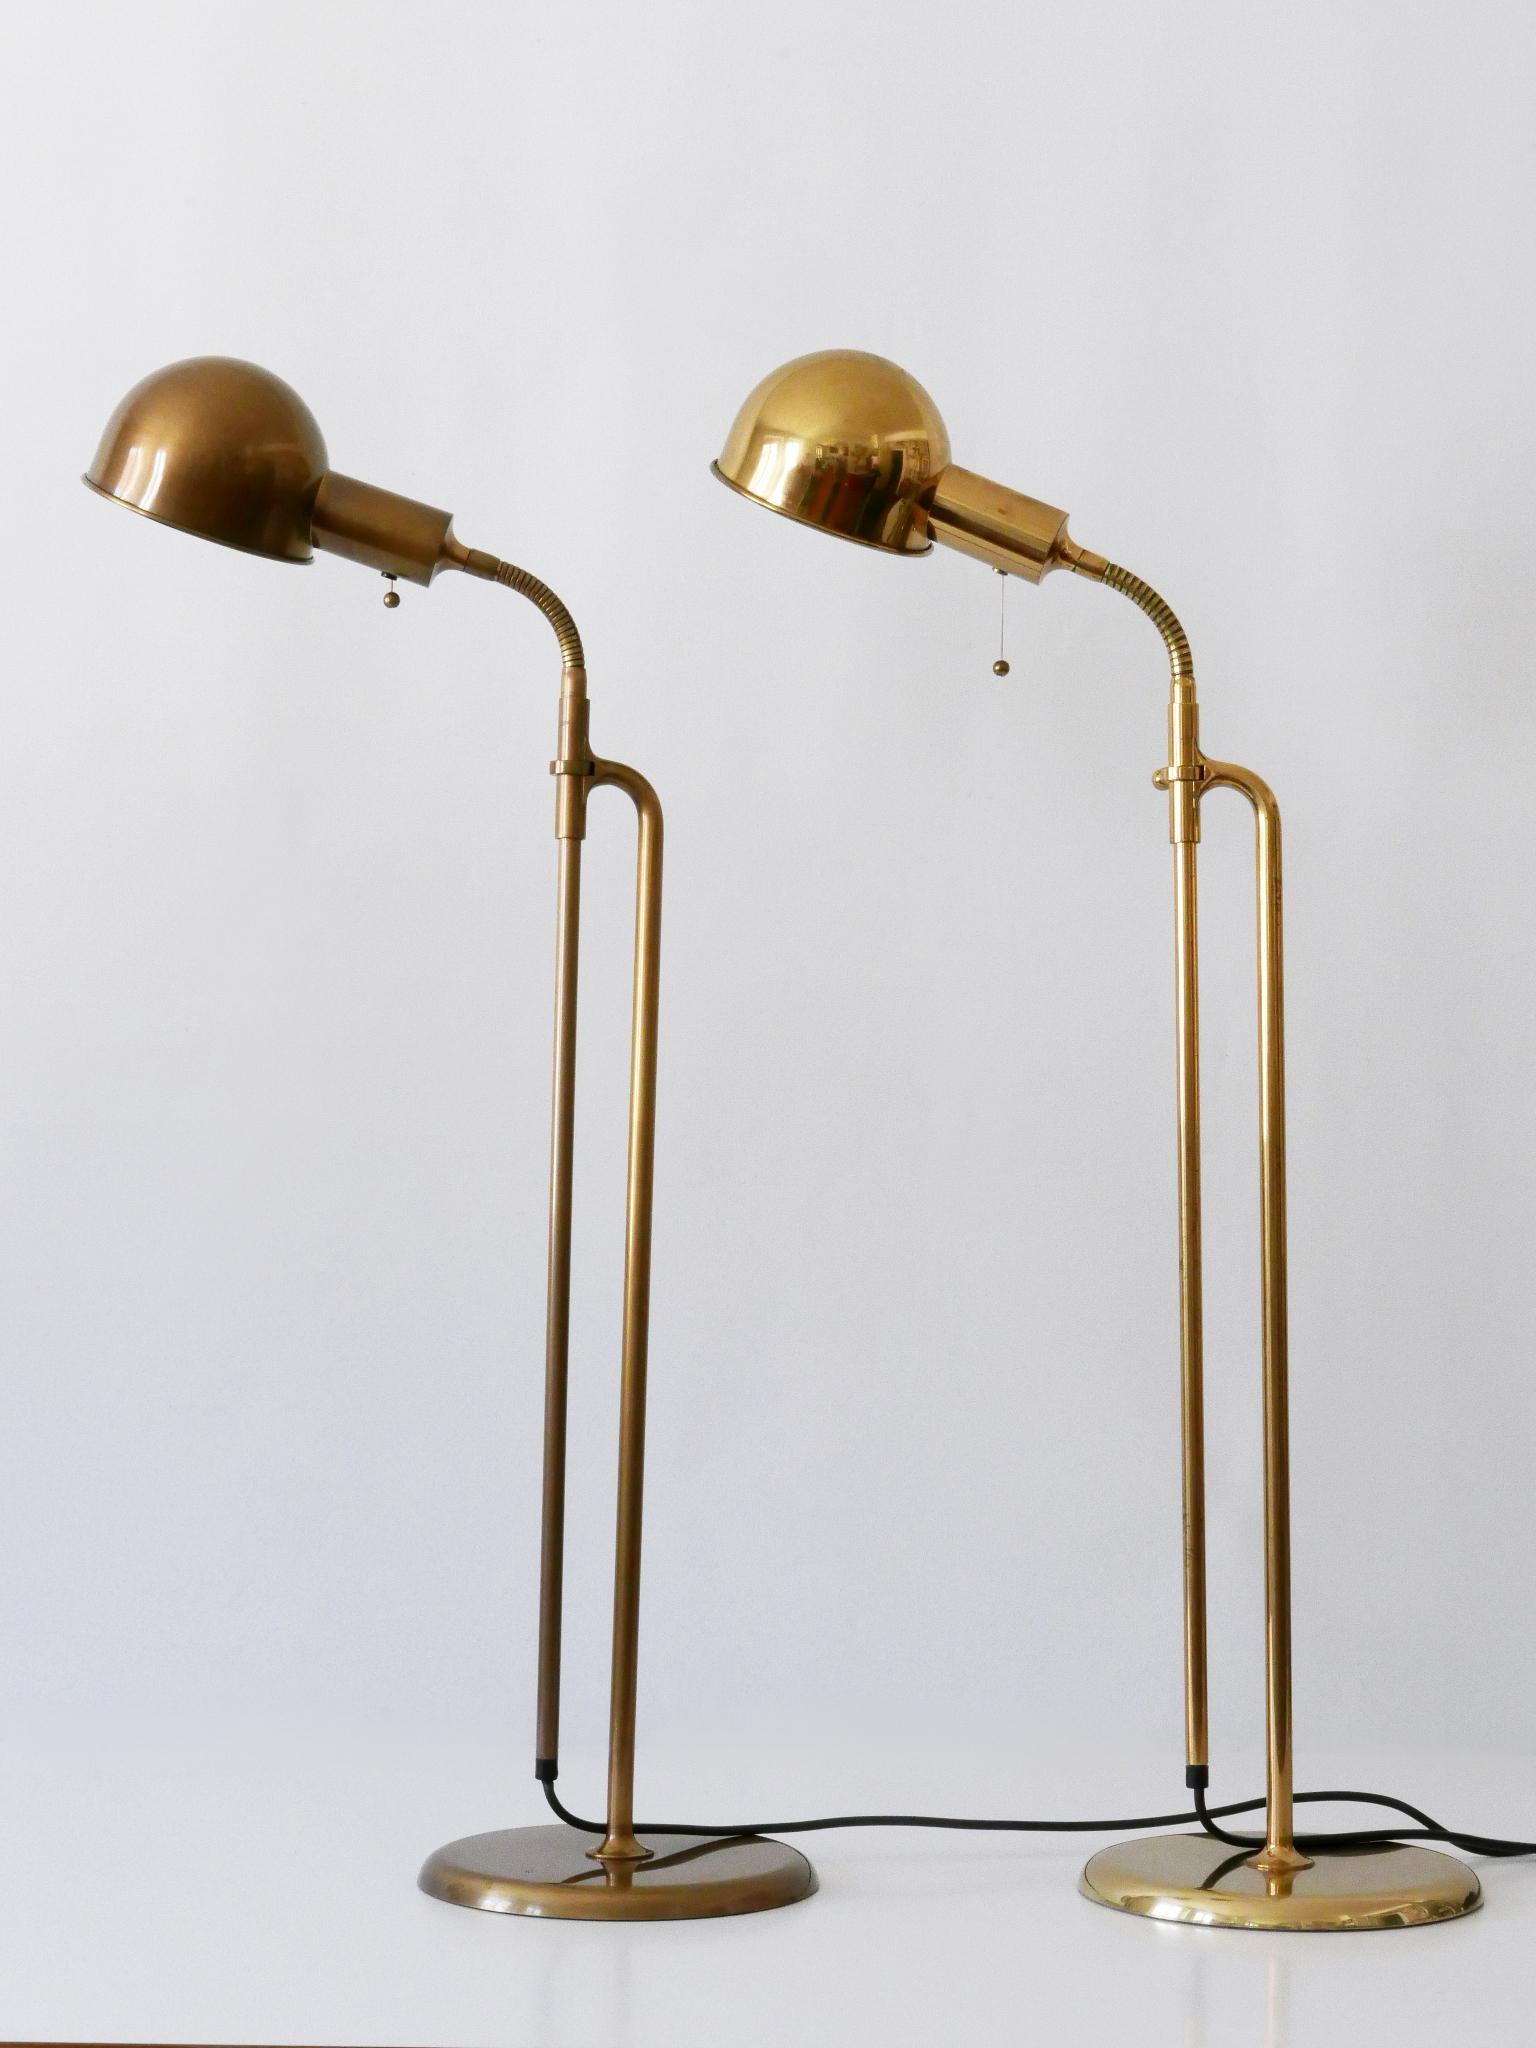 Set of Two Mid-Century Modern Reading Floor Lamps 'Bola' by Florian Schulz 1970s For Sale 4